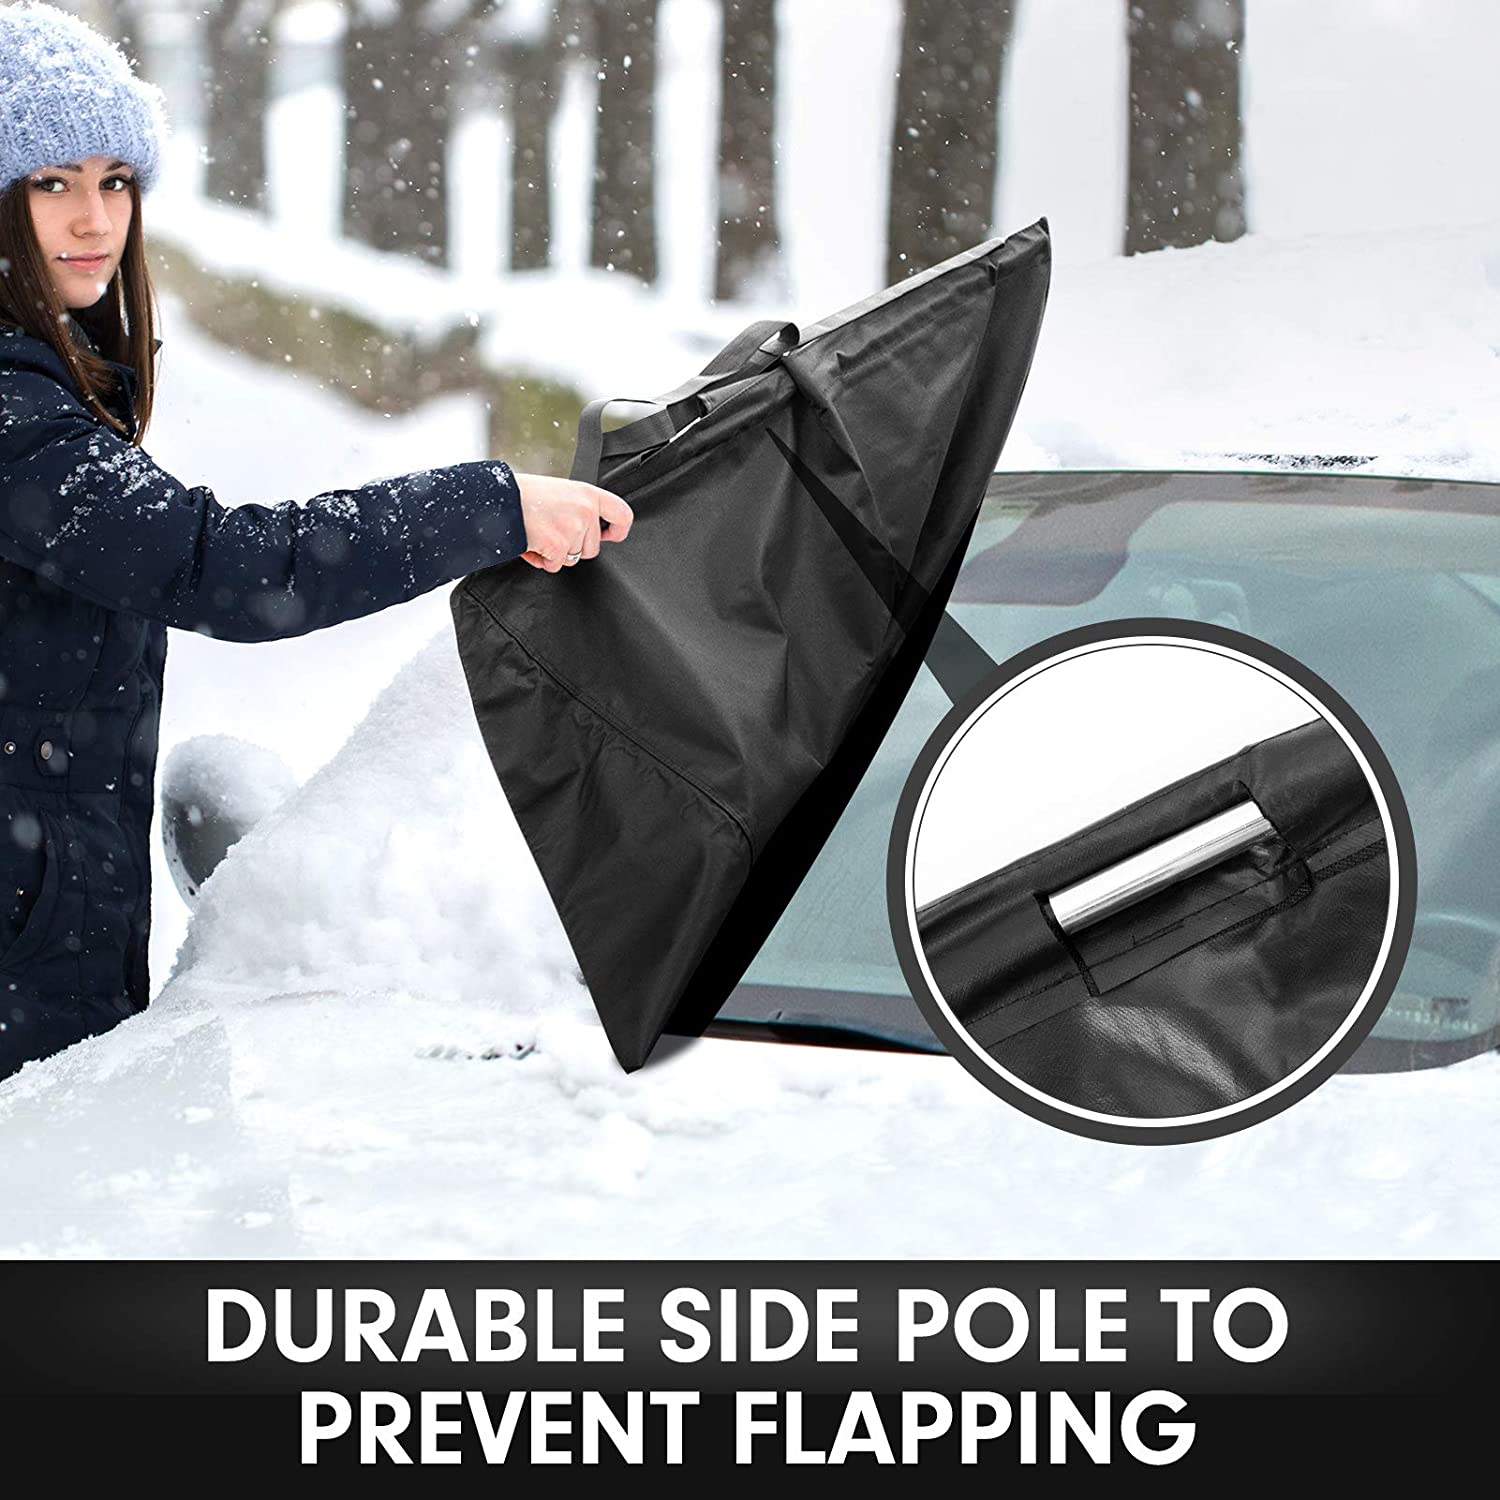 Thicker Waterproof Windshield Cover Fits for Most Cars and SUV WOKOKO Car Windshield Snow Cover Ice Snow Frost Cover for Windscreen 